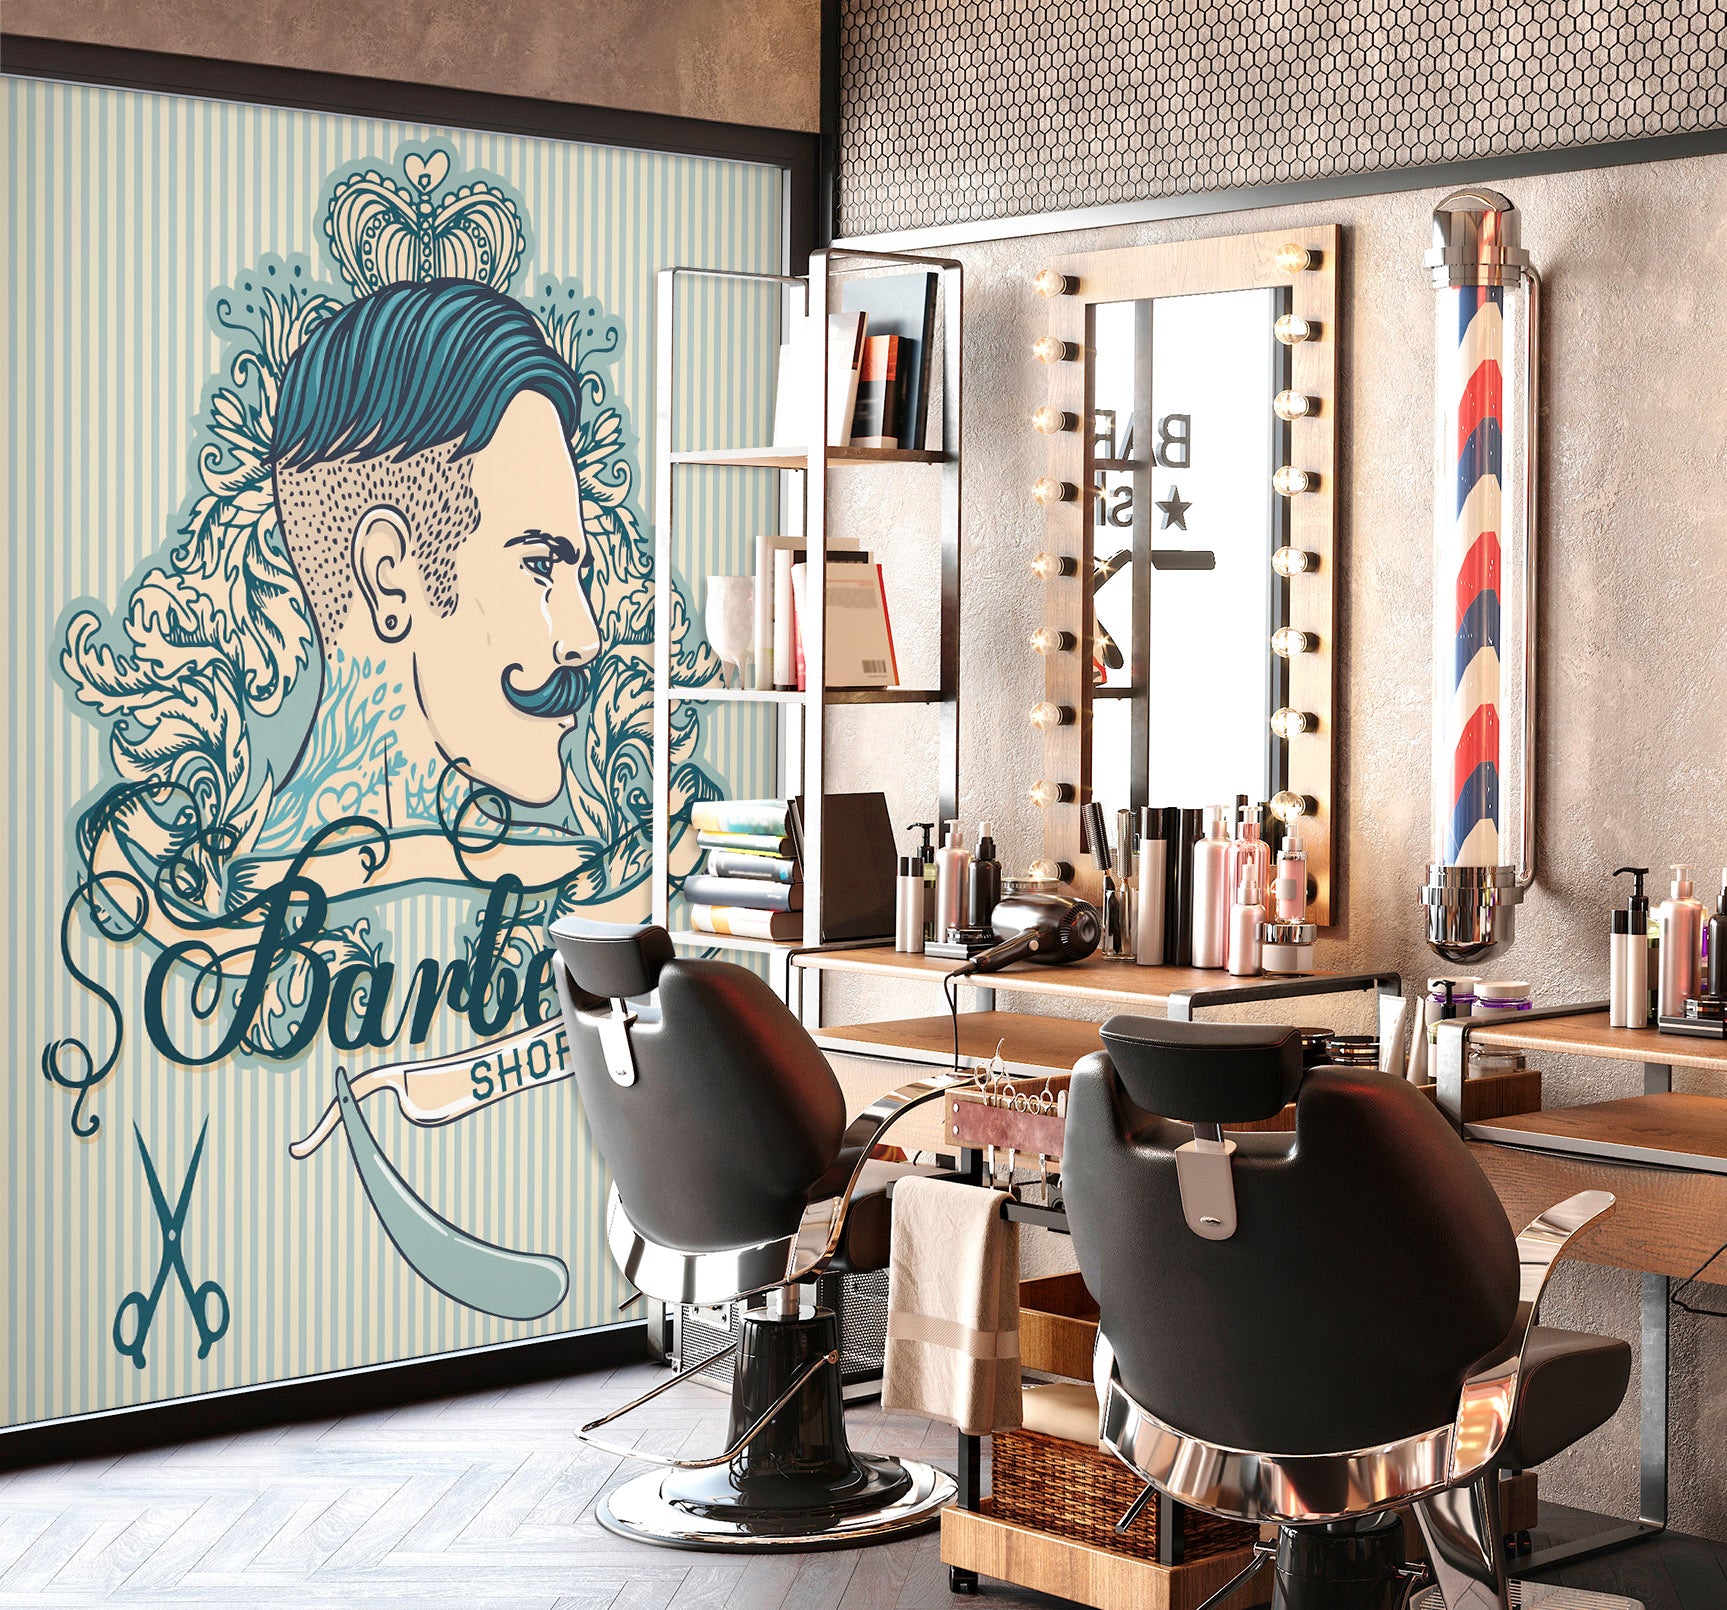 3D Hairstyle Pattern 115208 Barber Shop Wall Murals